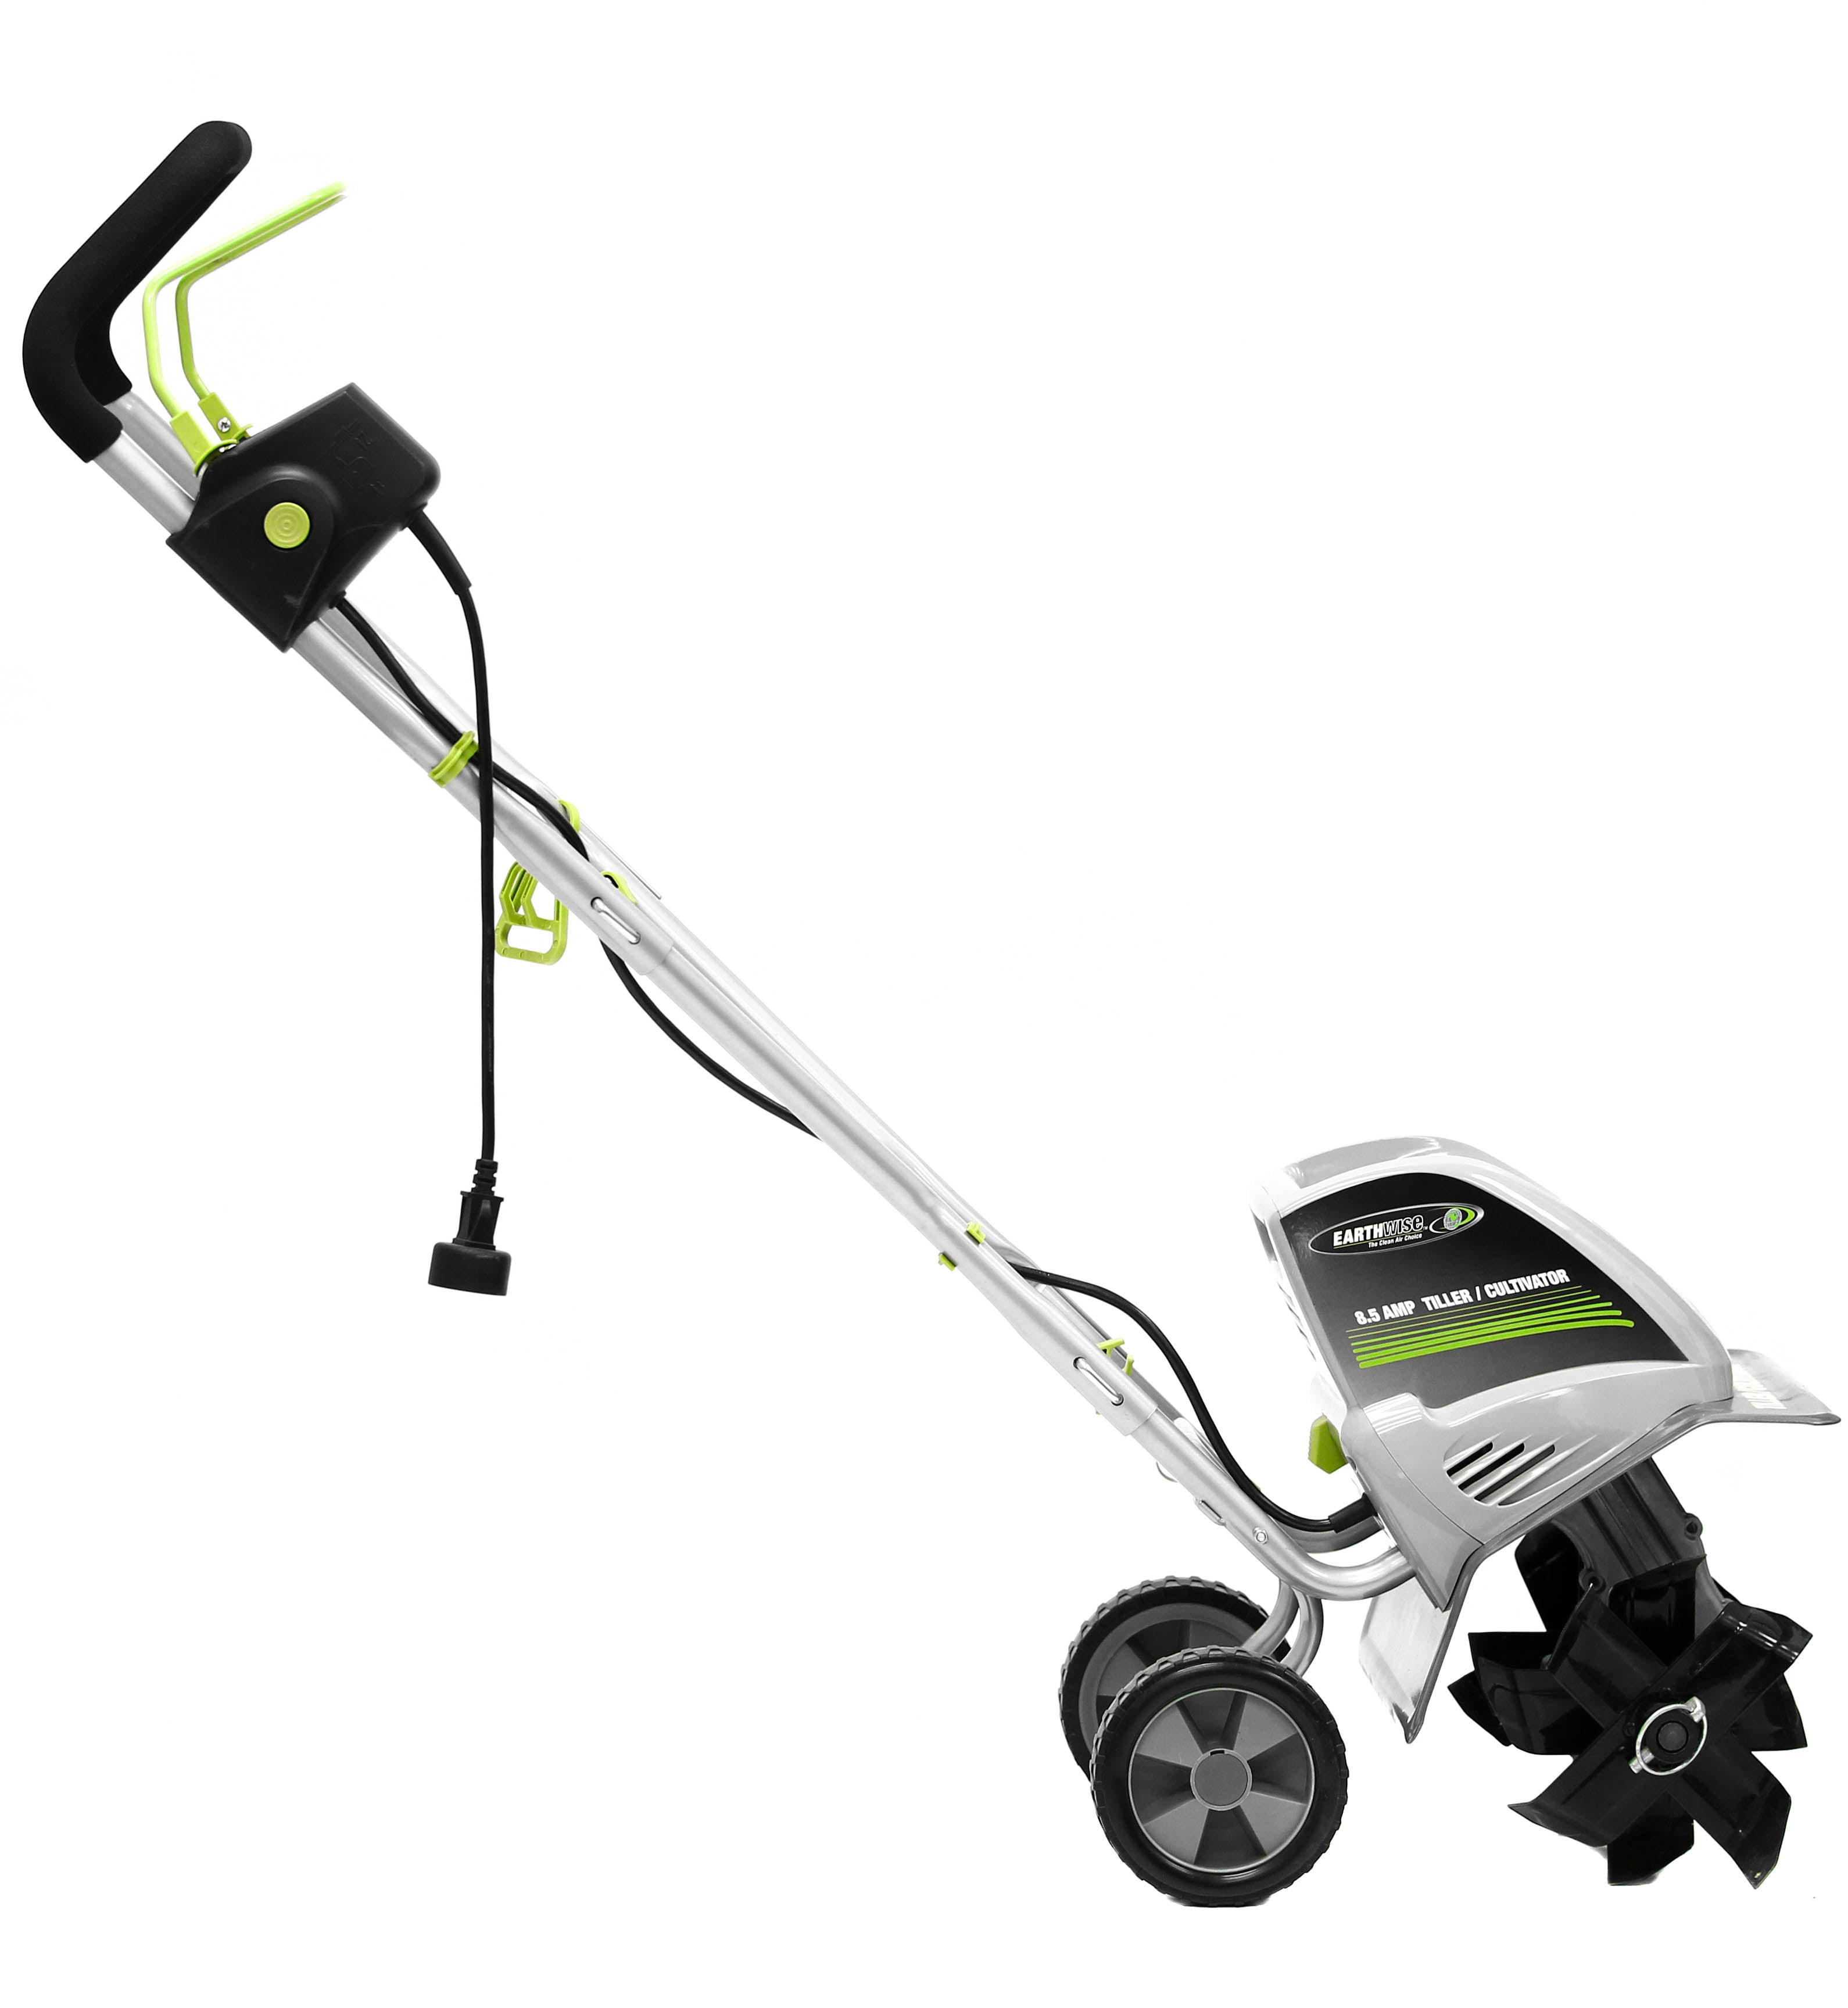 Earthwise Power Tools by ALM 11" 8.5-Amp 120V Corded Tiller/Cultivator